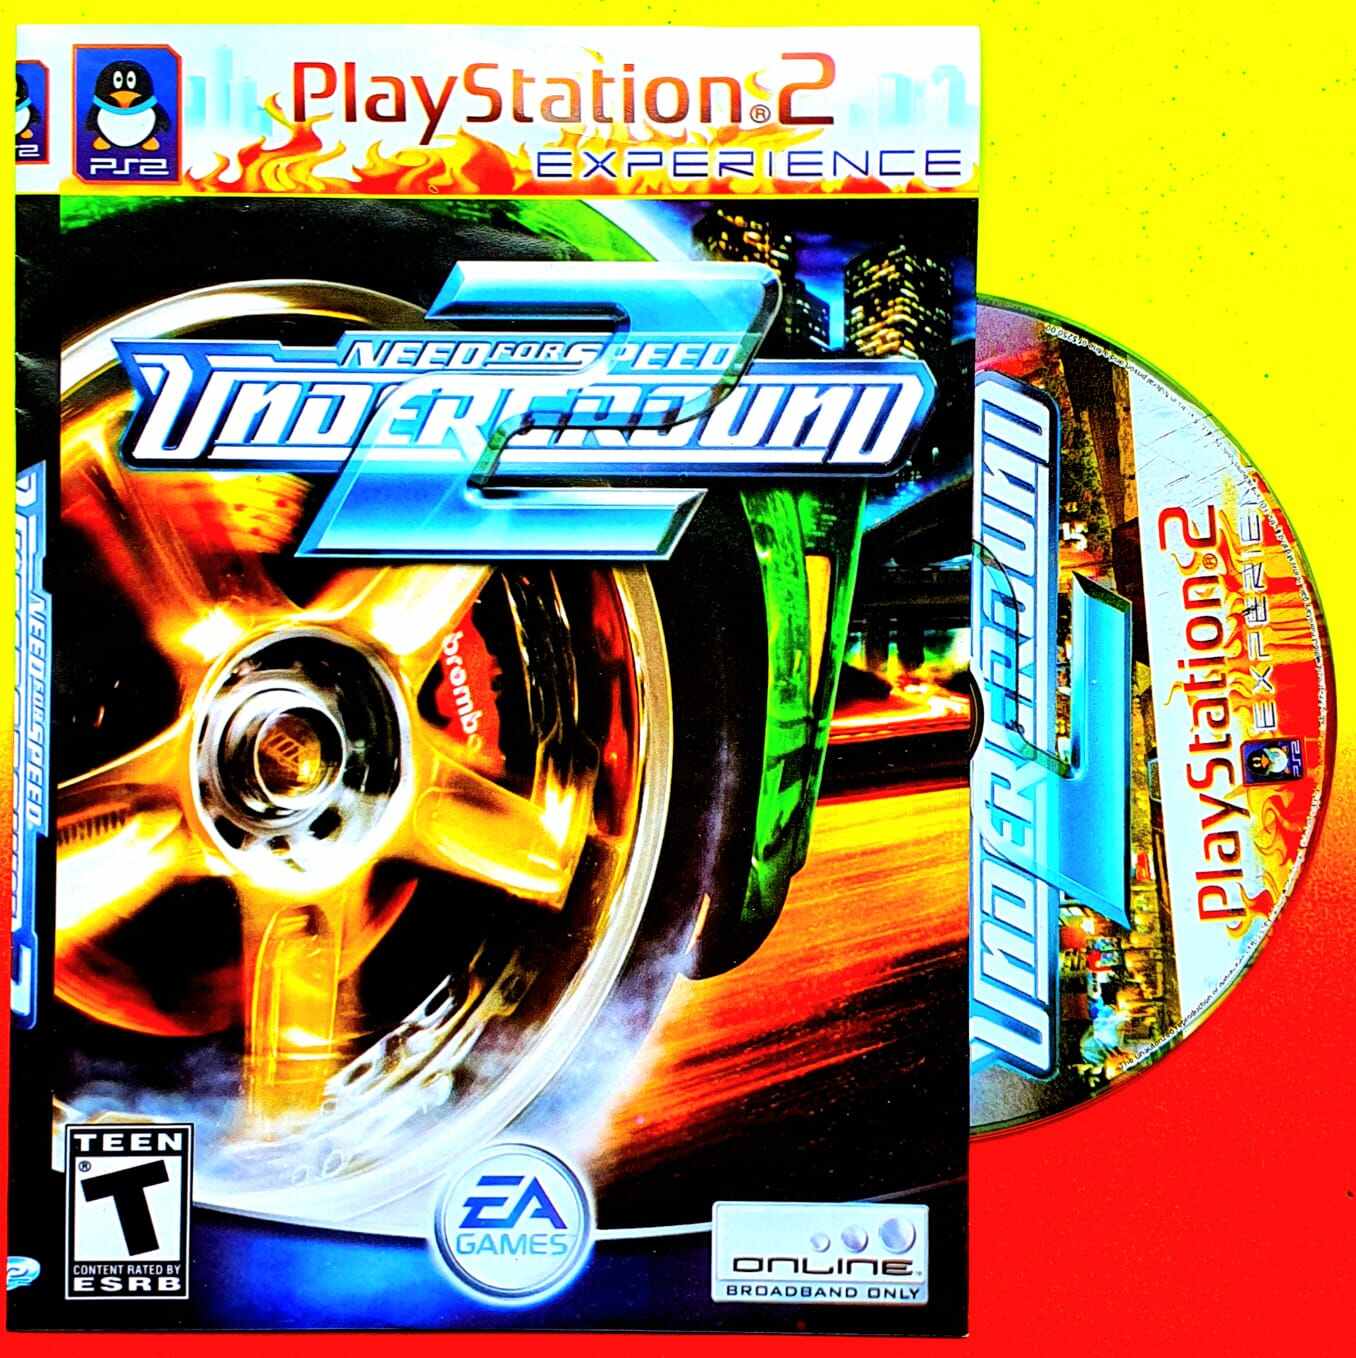 KASET VIDEO GAME PS2 BALAP MOBIL NEED FOR SPEED UNDERGROUND